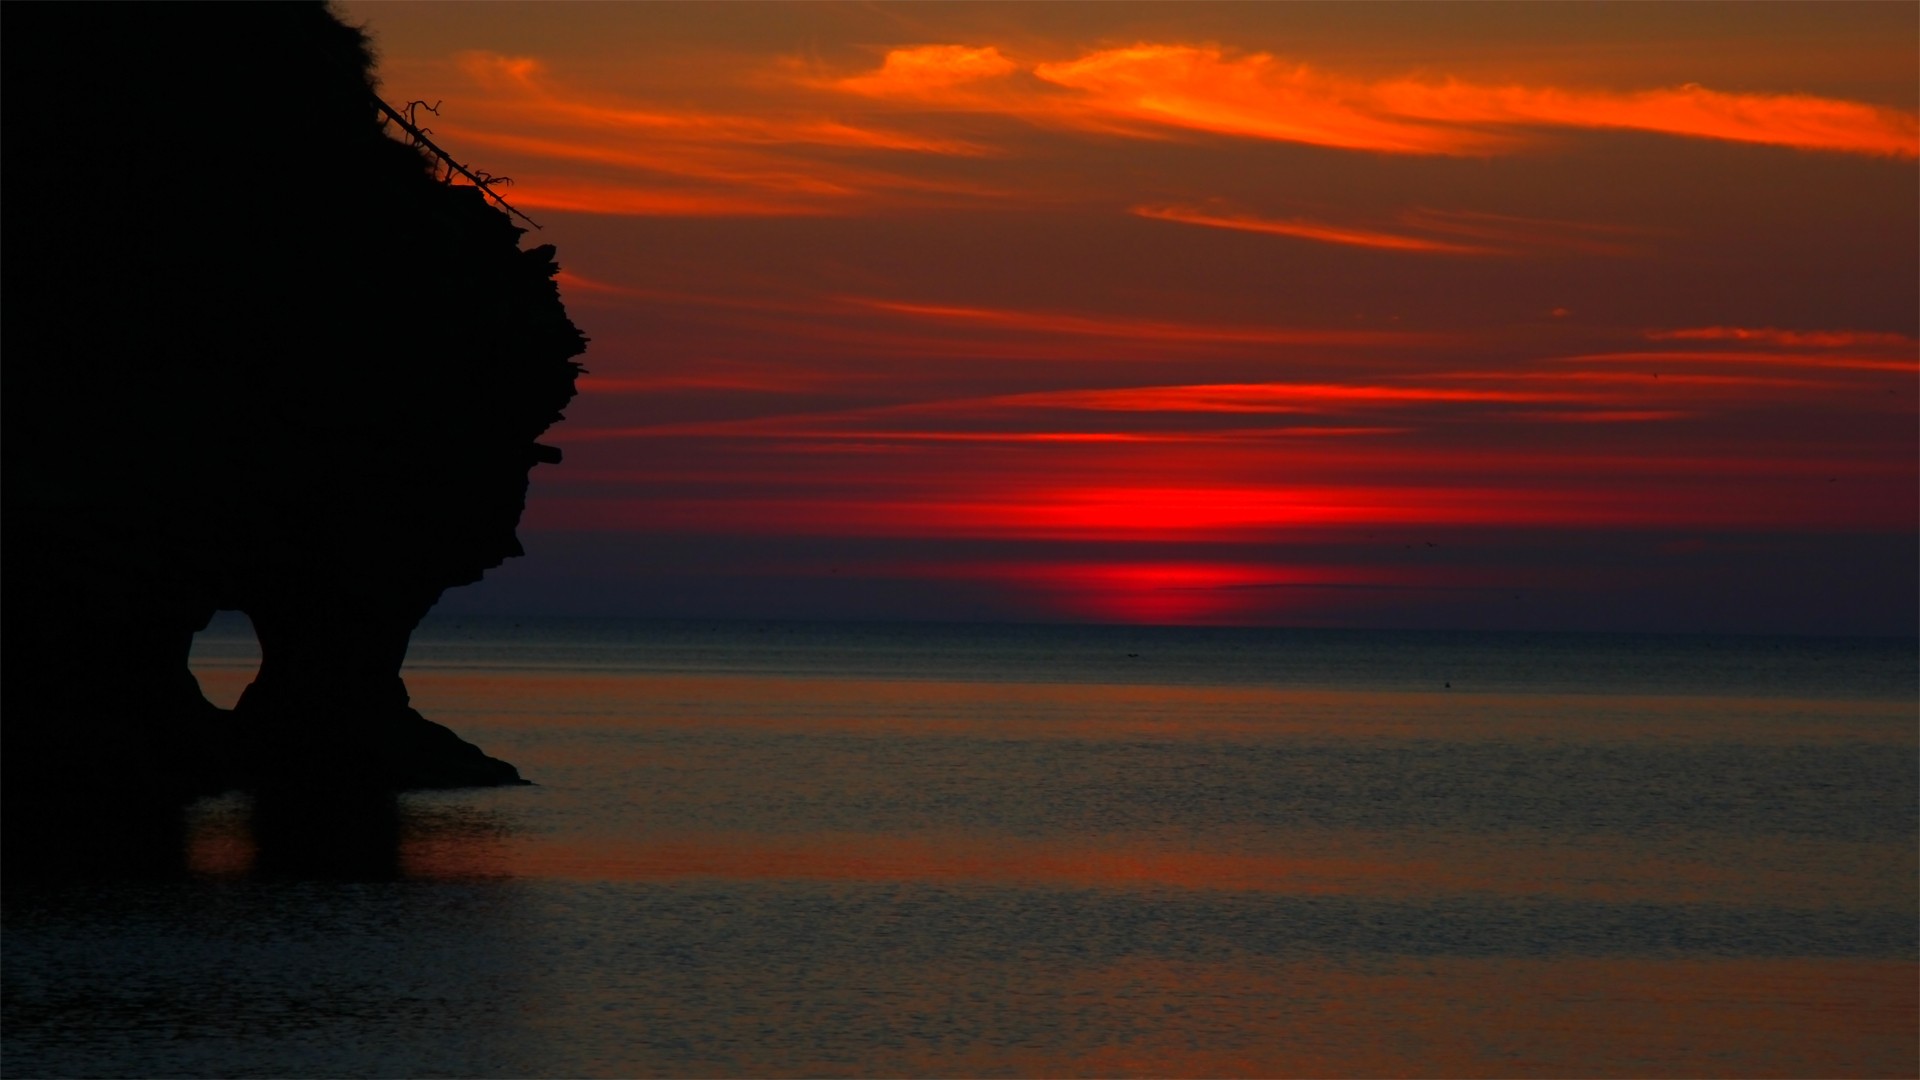 General 1920x1080 sunset nature sea skyscape purple sky coves silhouette red sky